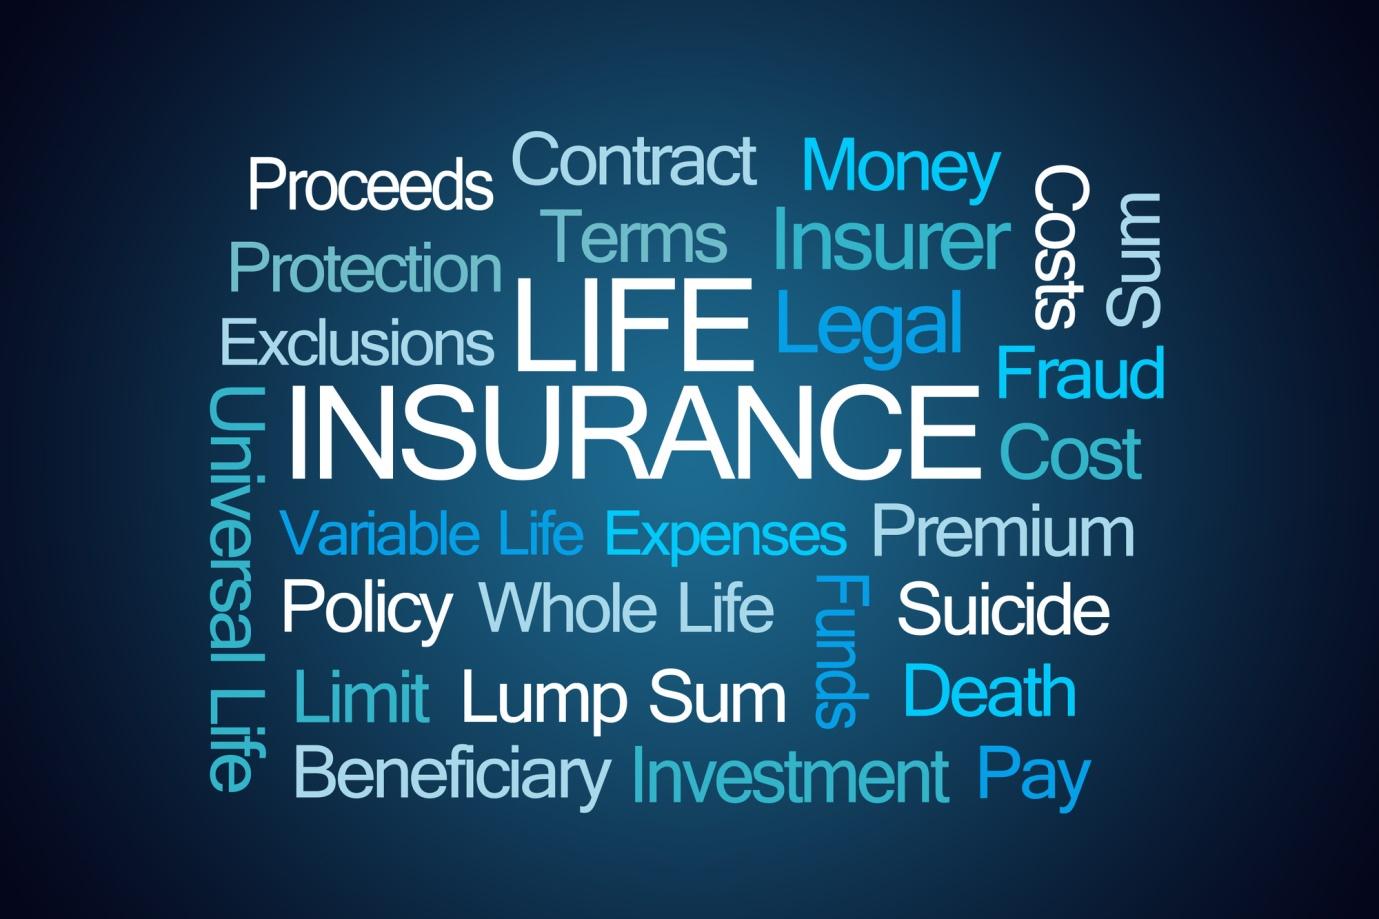 What Are the Different Types of Life Insurance That Exist Today